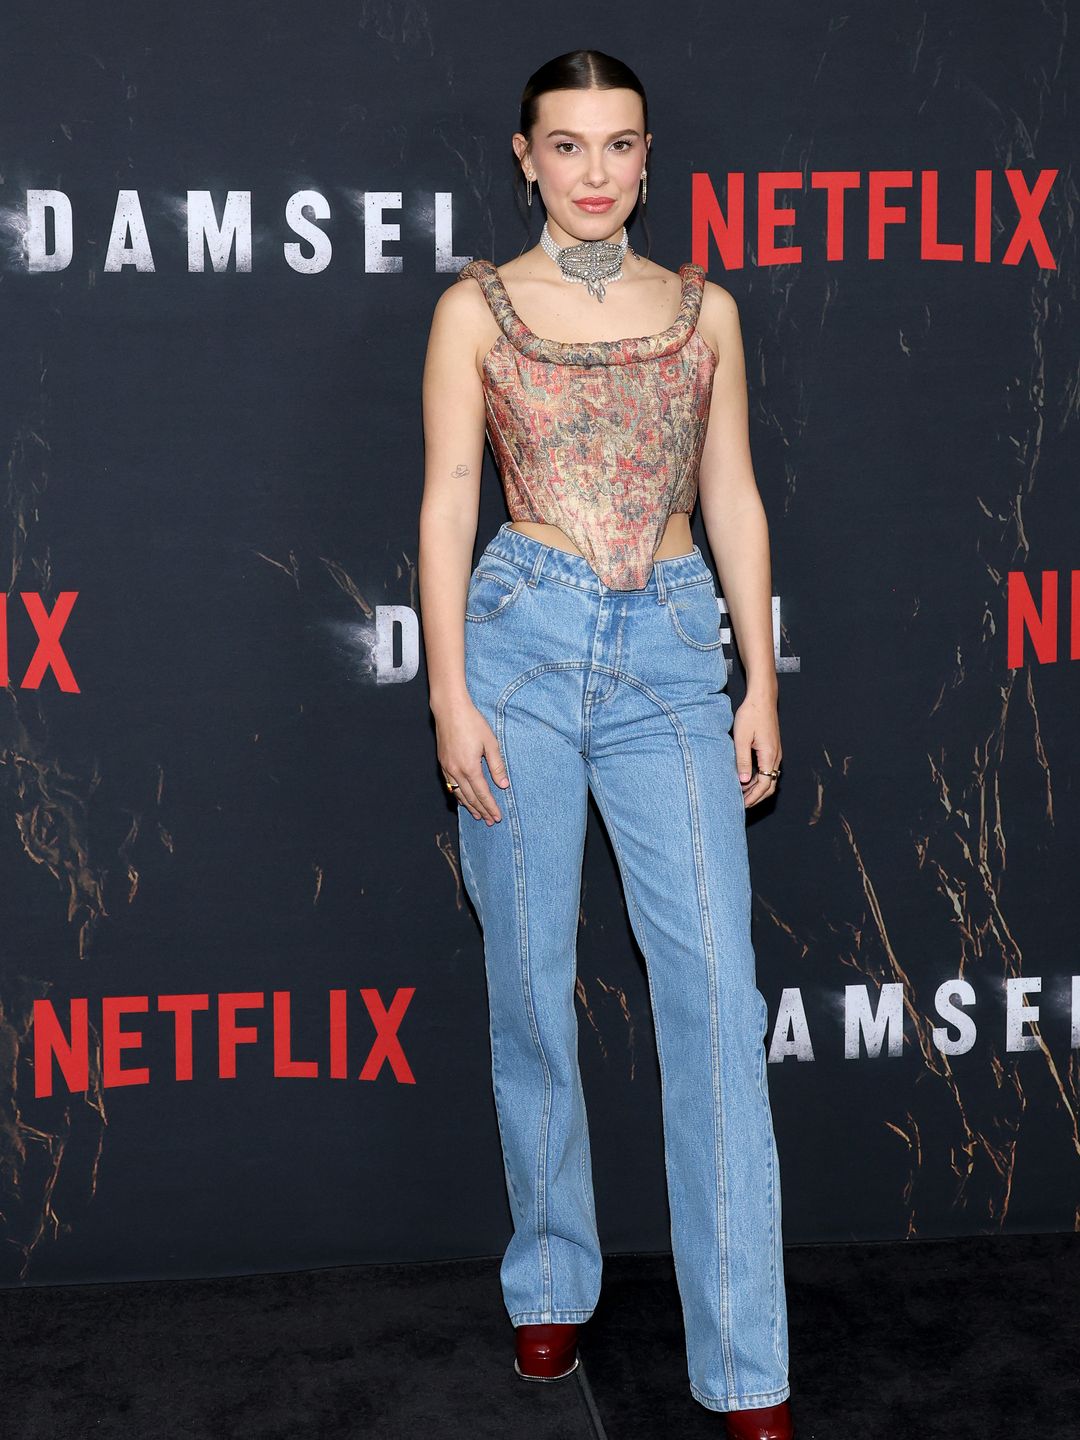 Millie Bobby Brown attends the "Damsel" Photo Call in NYC wearing jeans and a corset